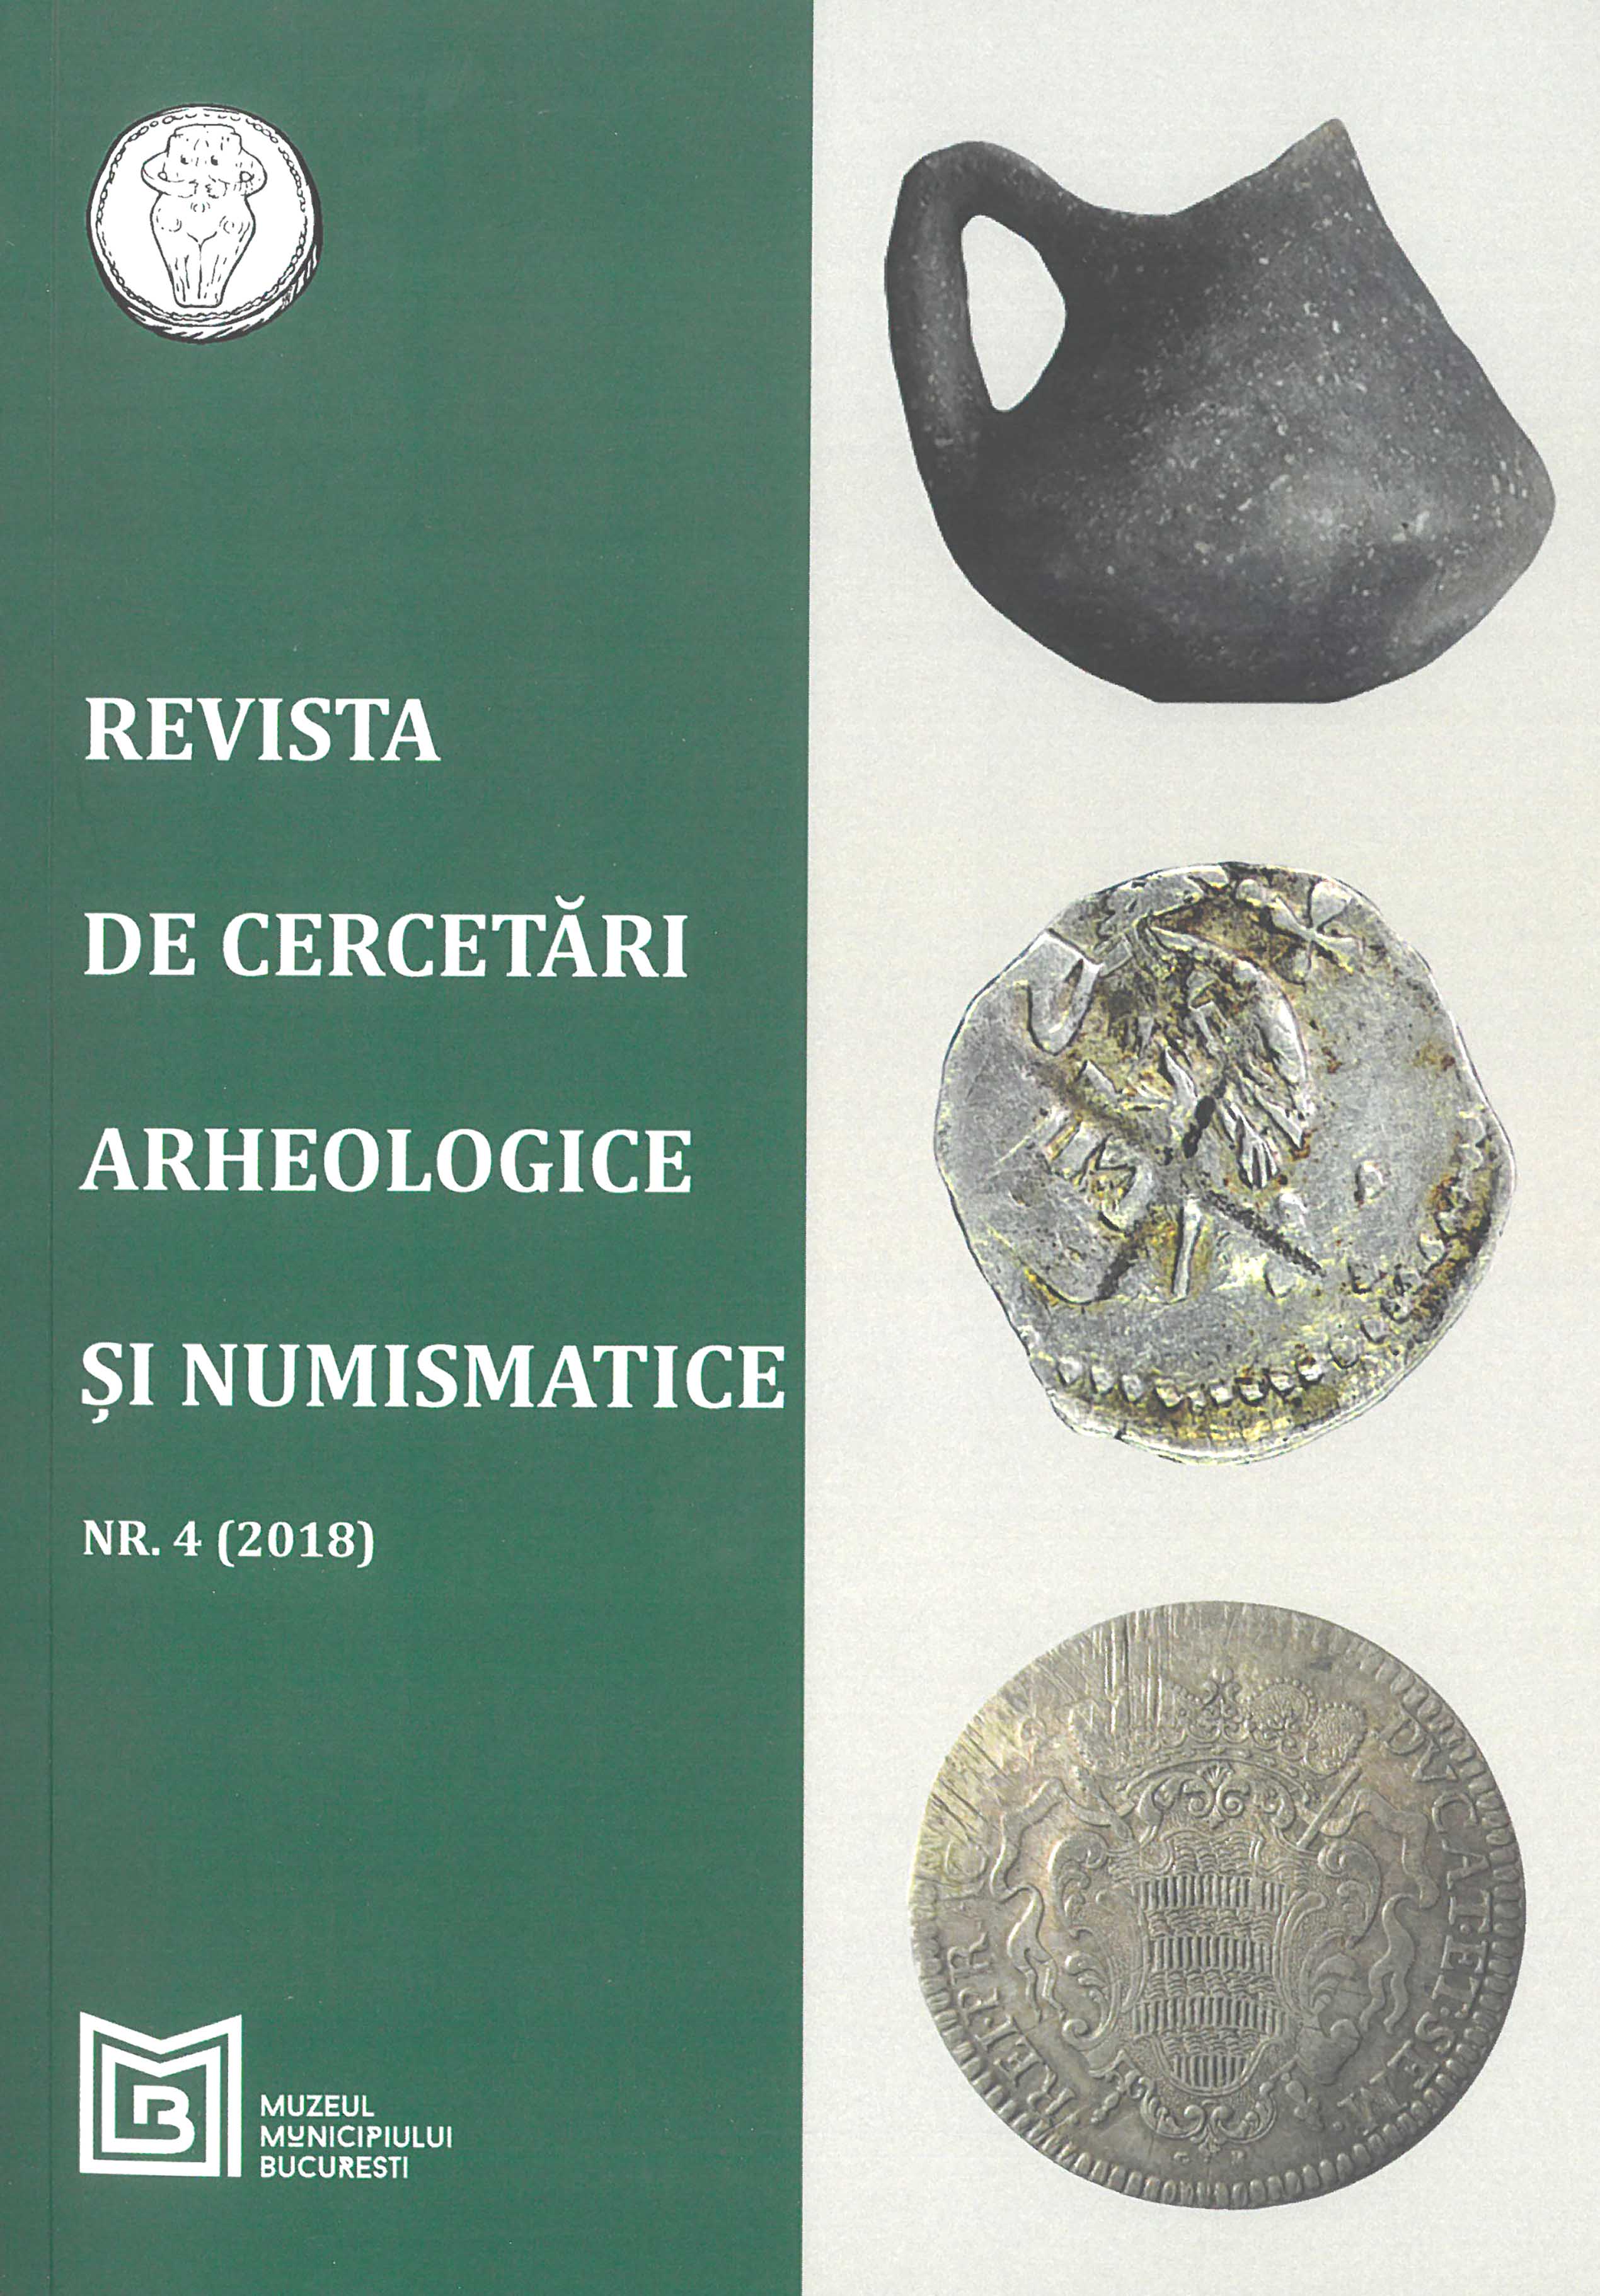 LOST AND FOUND: A POTTERY ASSEMBLAGE FROM THE EXCAVATIONS AT HISTRIA IN 1951 IN THE COLLECTION OF BUCHAREST MUNICIPALITY MUSEUM Cover Image